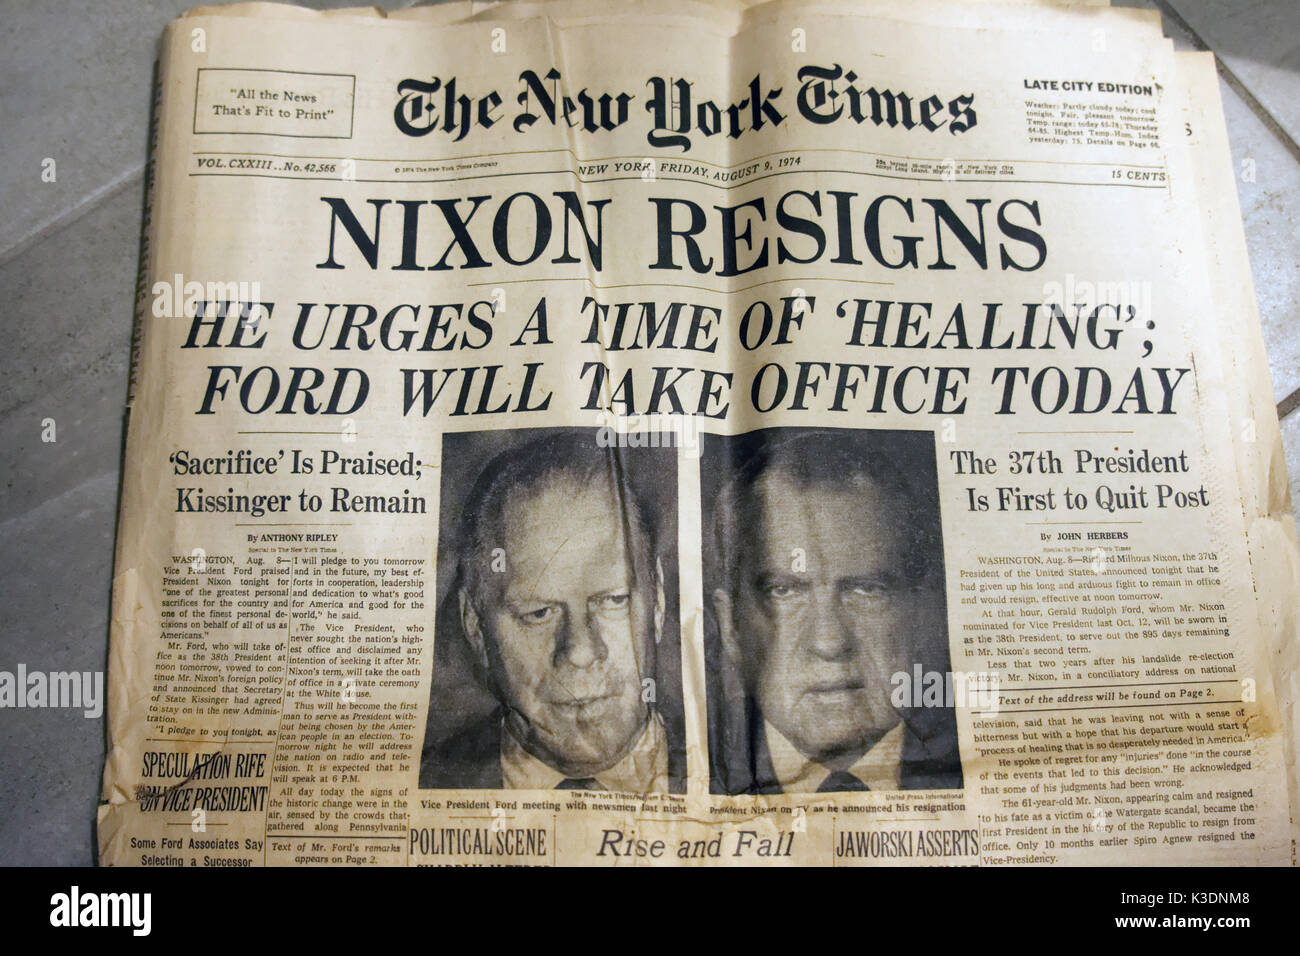 The headline on The New York Times issue of Aug. 9, 1974 said “Nixon Resigns.” Stock Photo